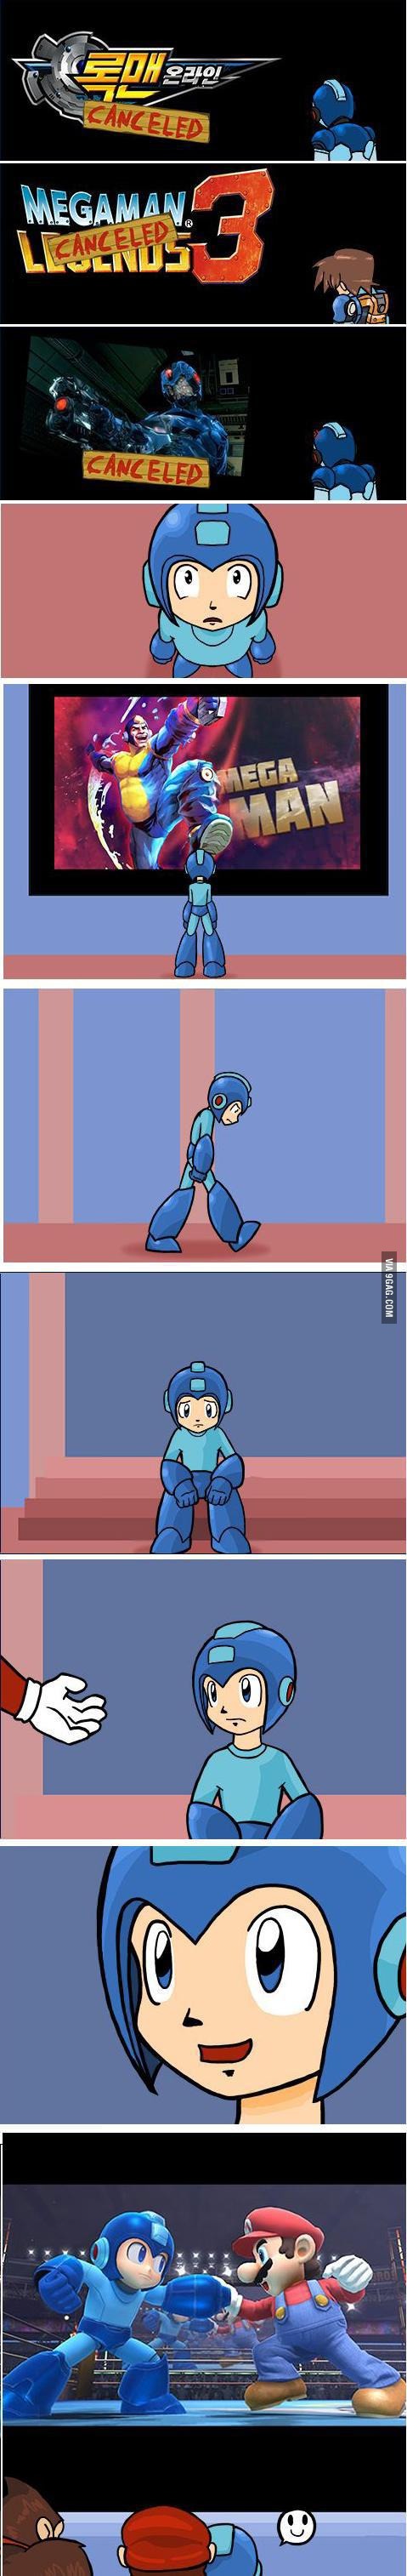 How Megaman joined the upcoming Super Smash Bros - meme